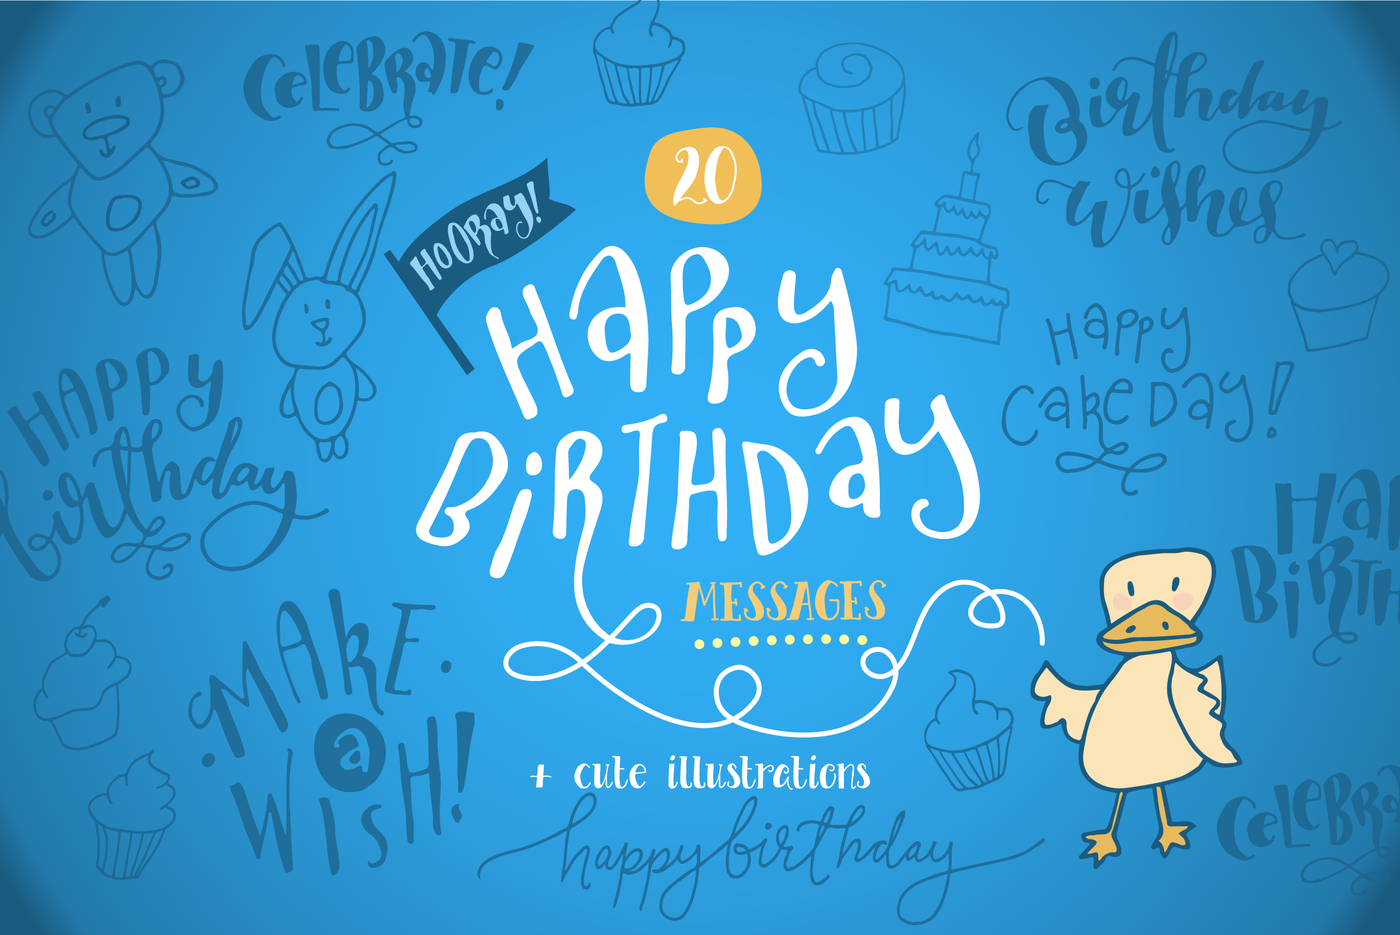 20 Happy Birthday Messages Card Templates By The Pen And Brush Thehungryjpeg Com